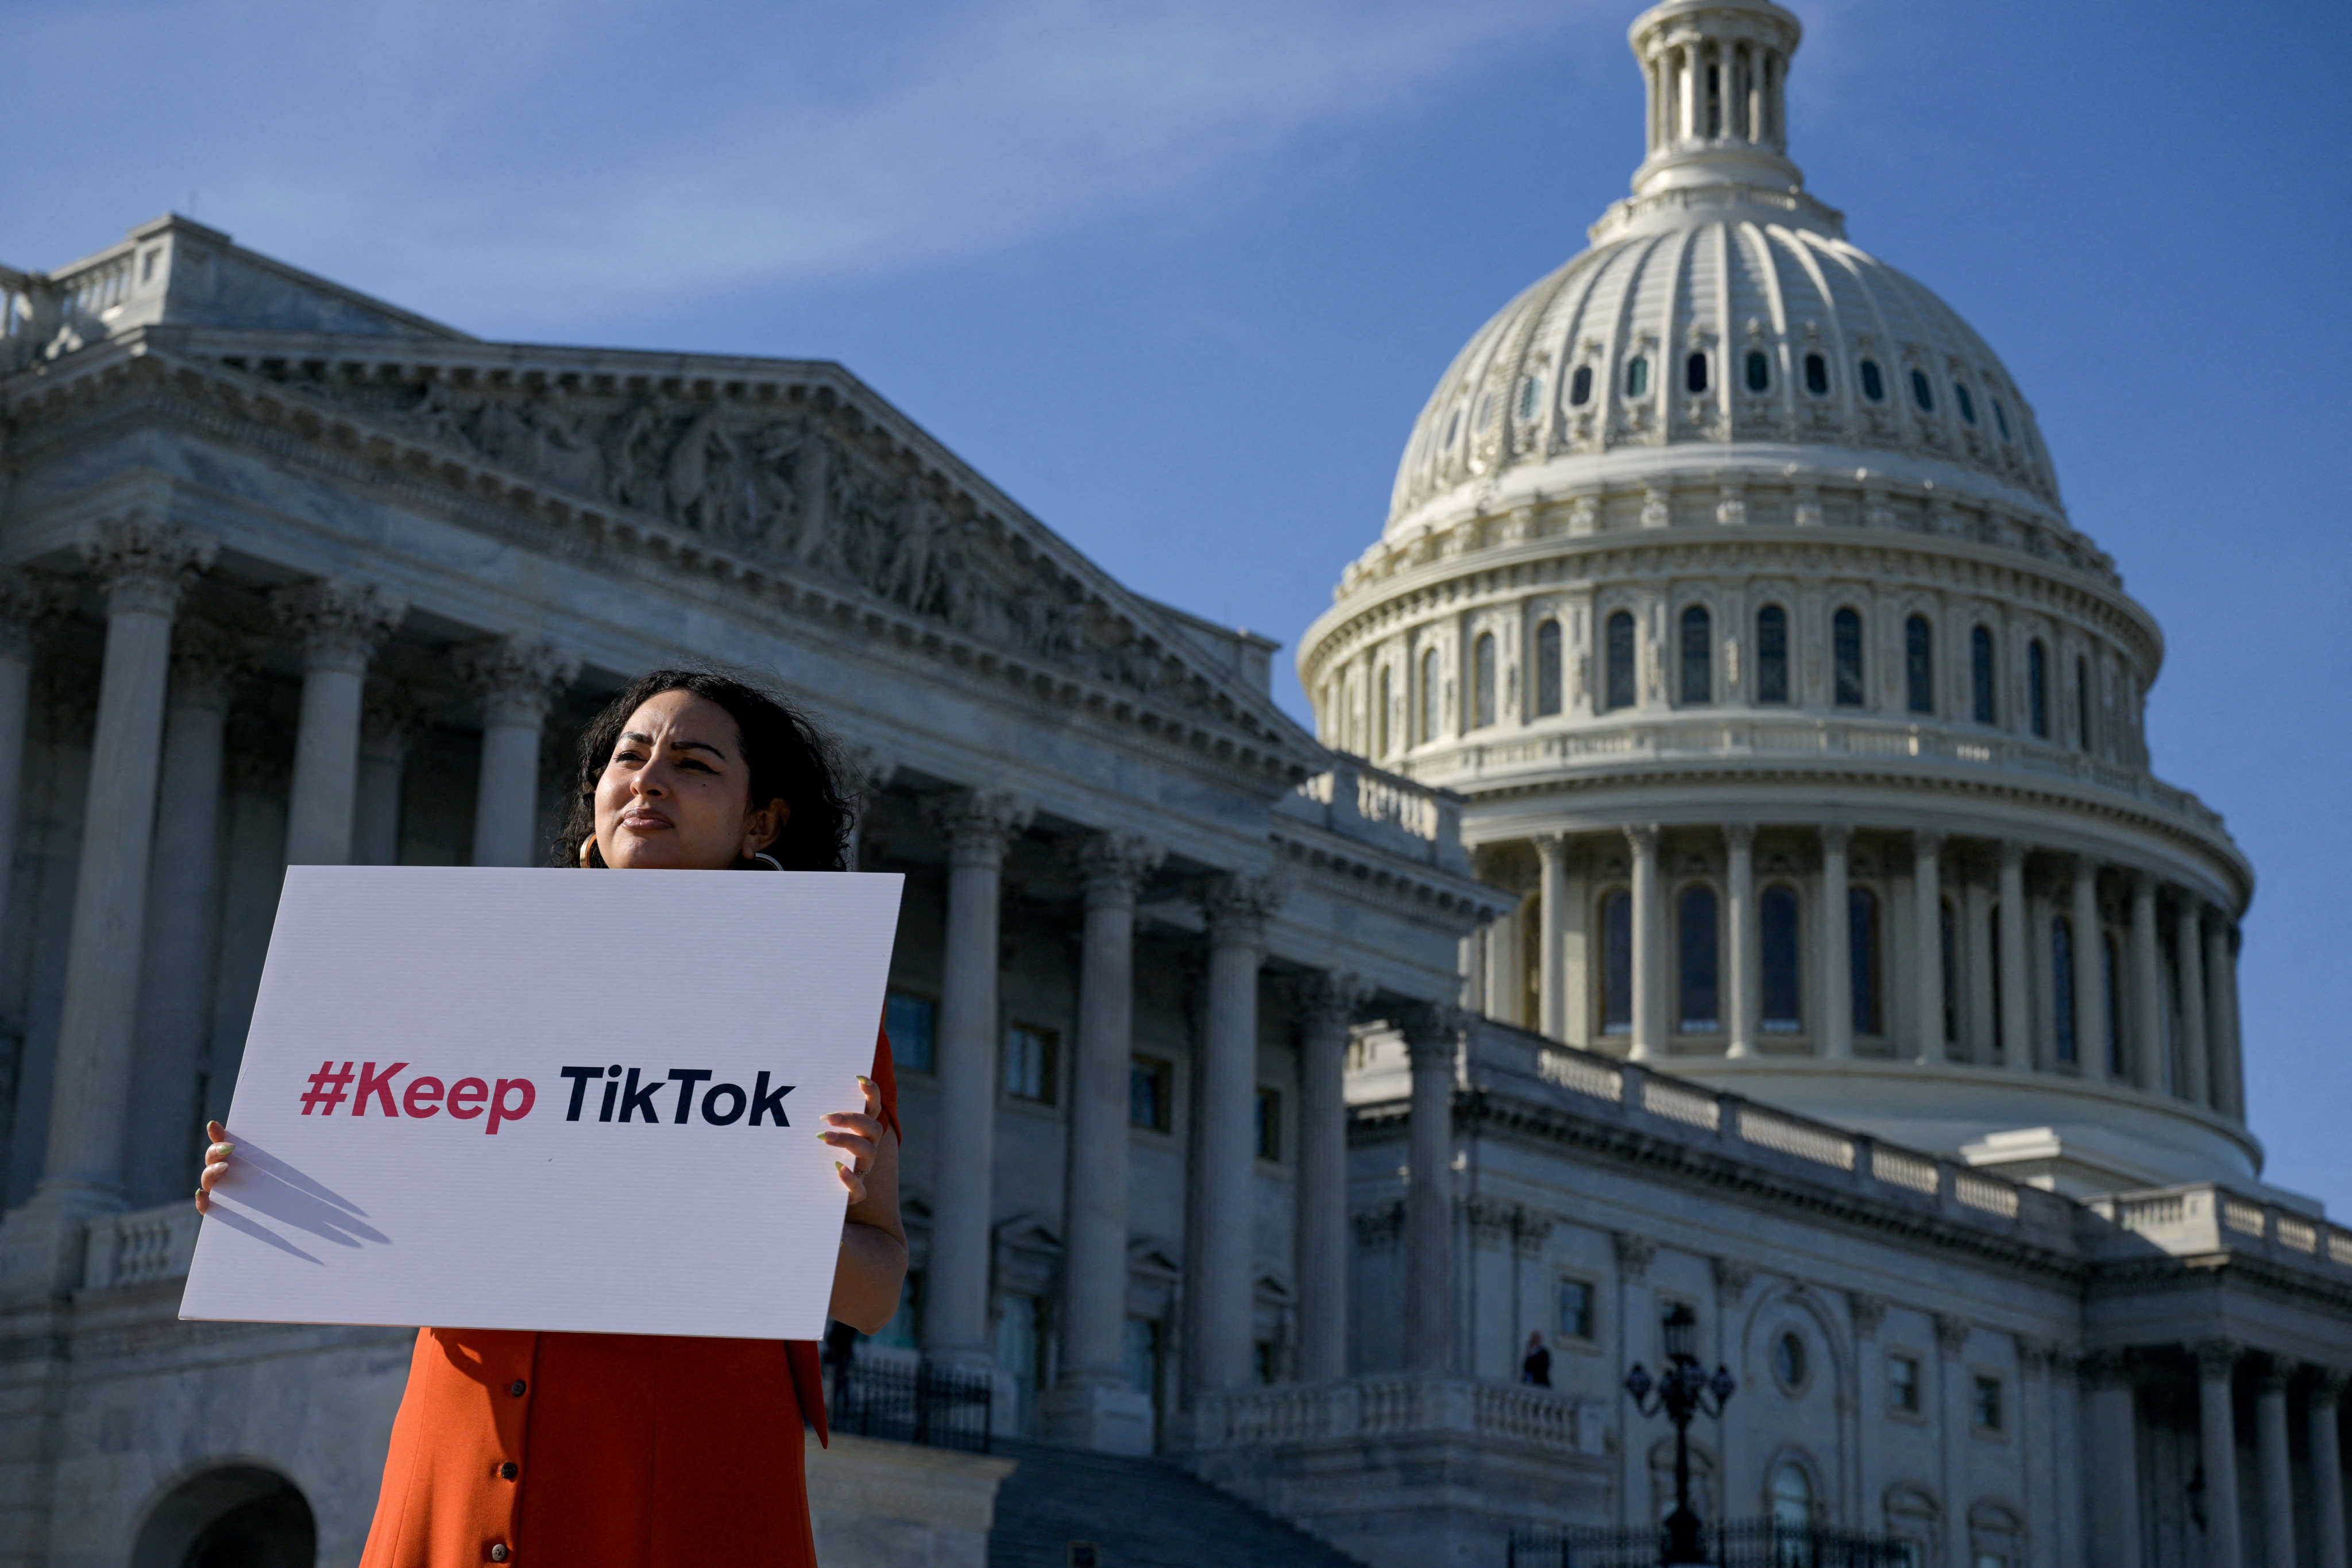 A woman demonstrates against a government crackdown on TikTok outside the US Capitol. Photo: Reuters